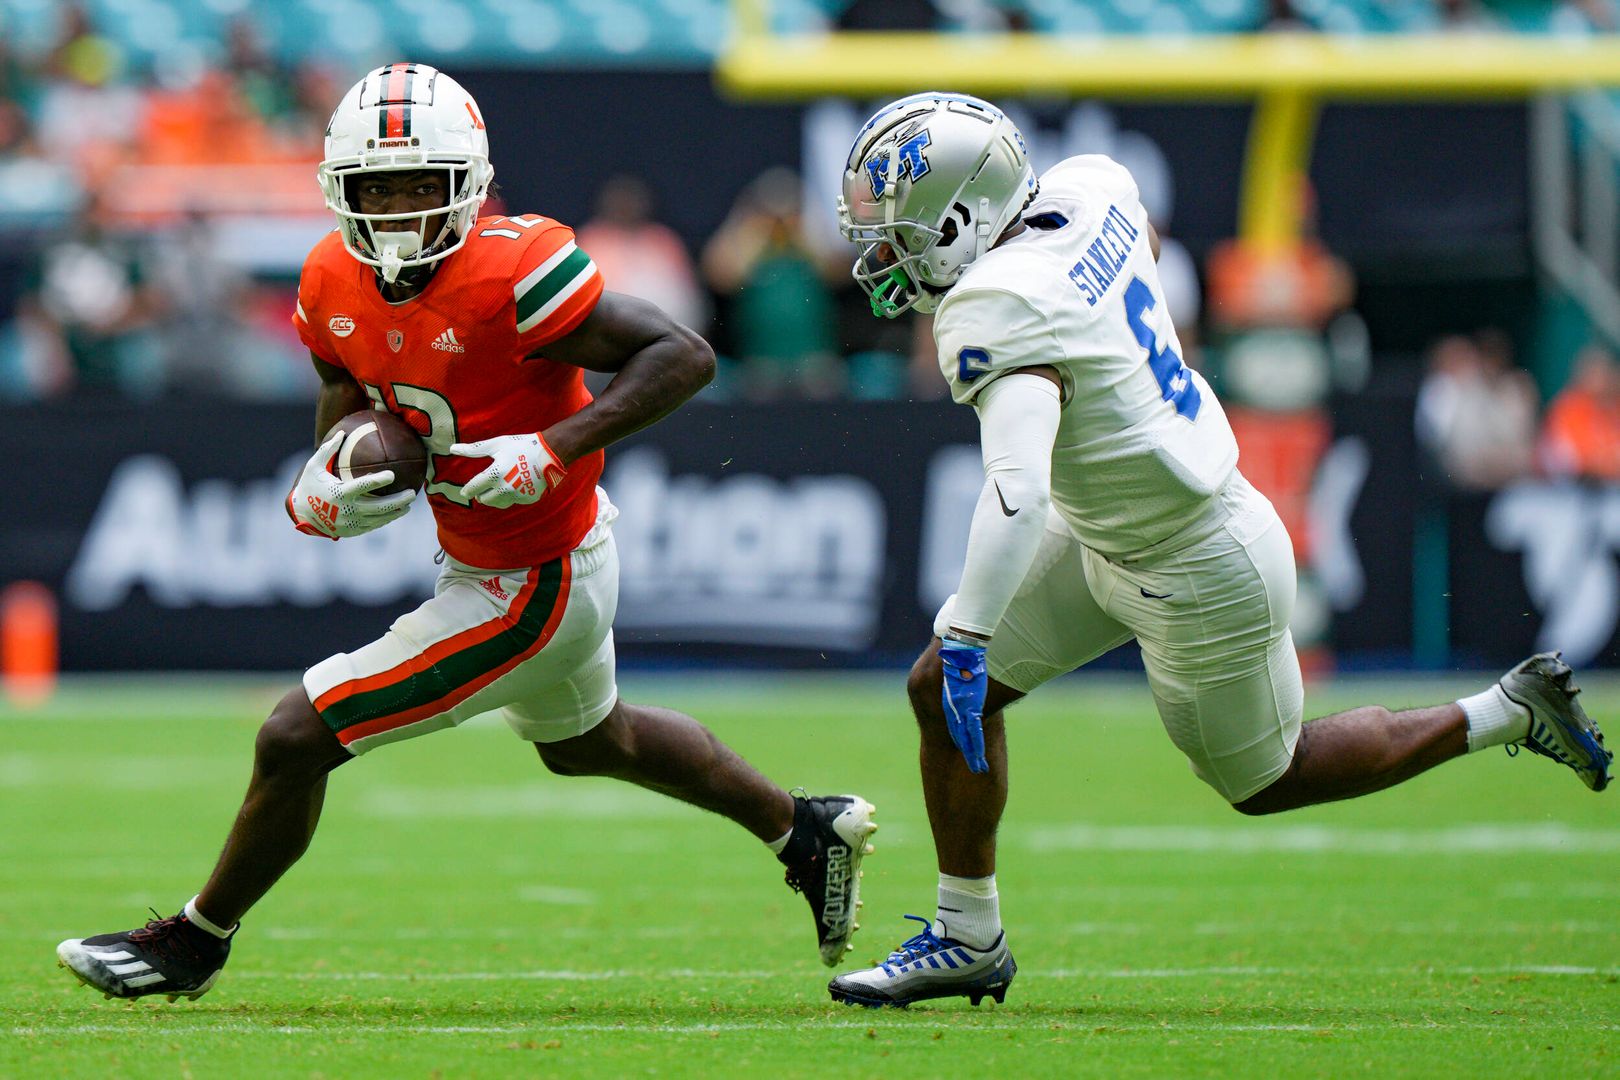 Photo Gallery: Canes Football vs. Middle Tennessee